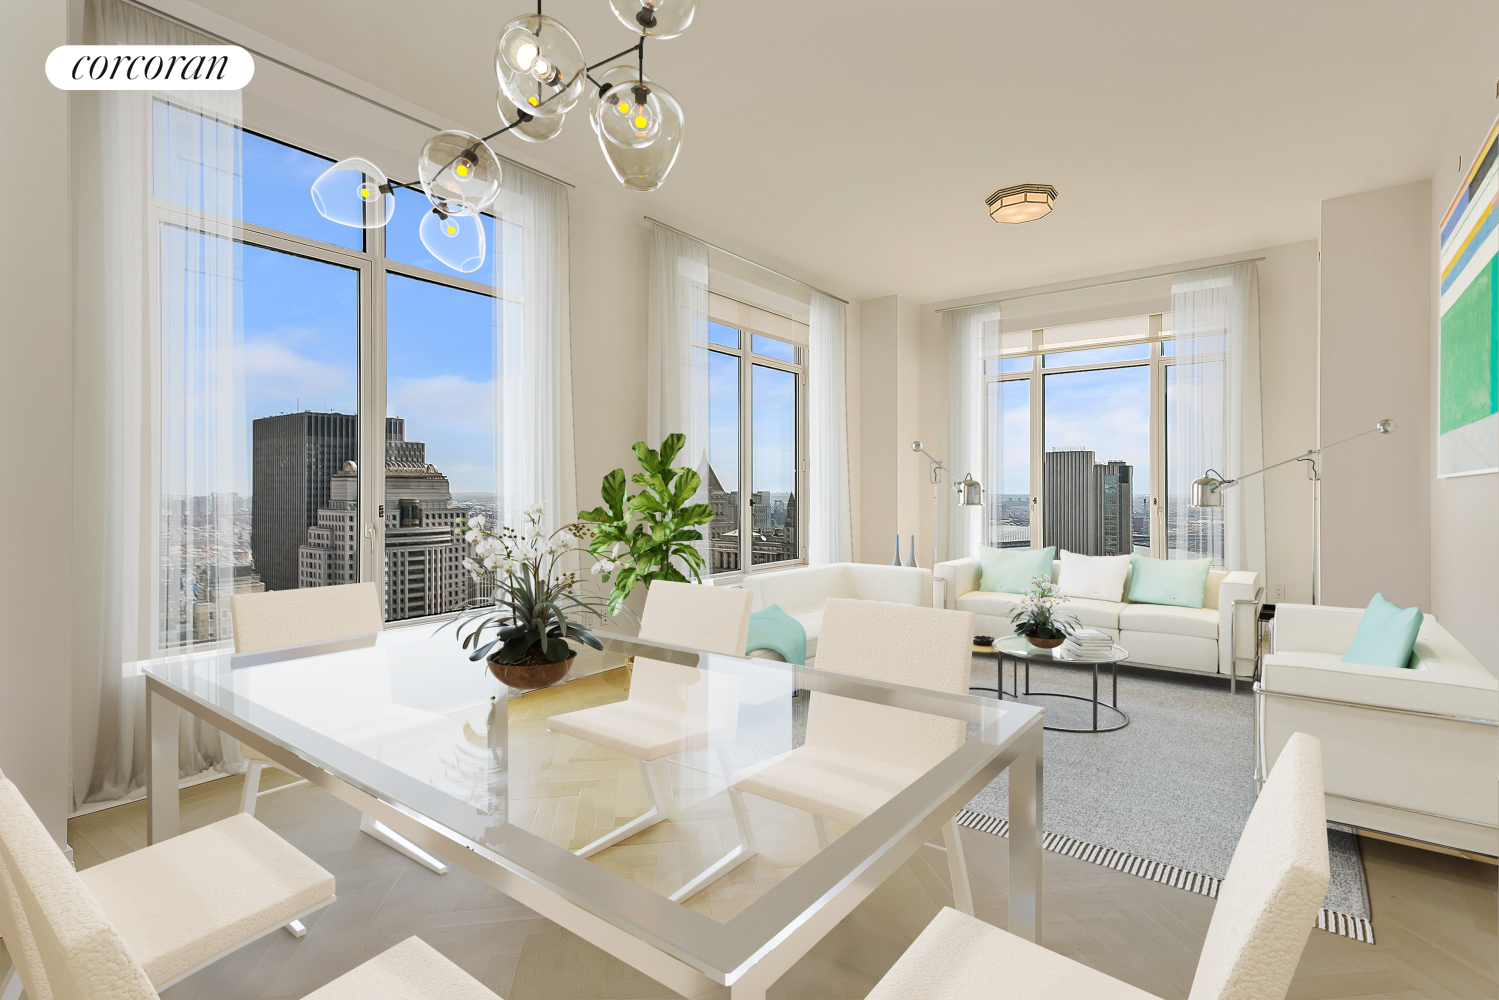 30 Park Place 50B, Tribeca, Downtown, NYC - 2 Bedrooms  
3.5 Bathrooms  
4 Rooms - 